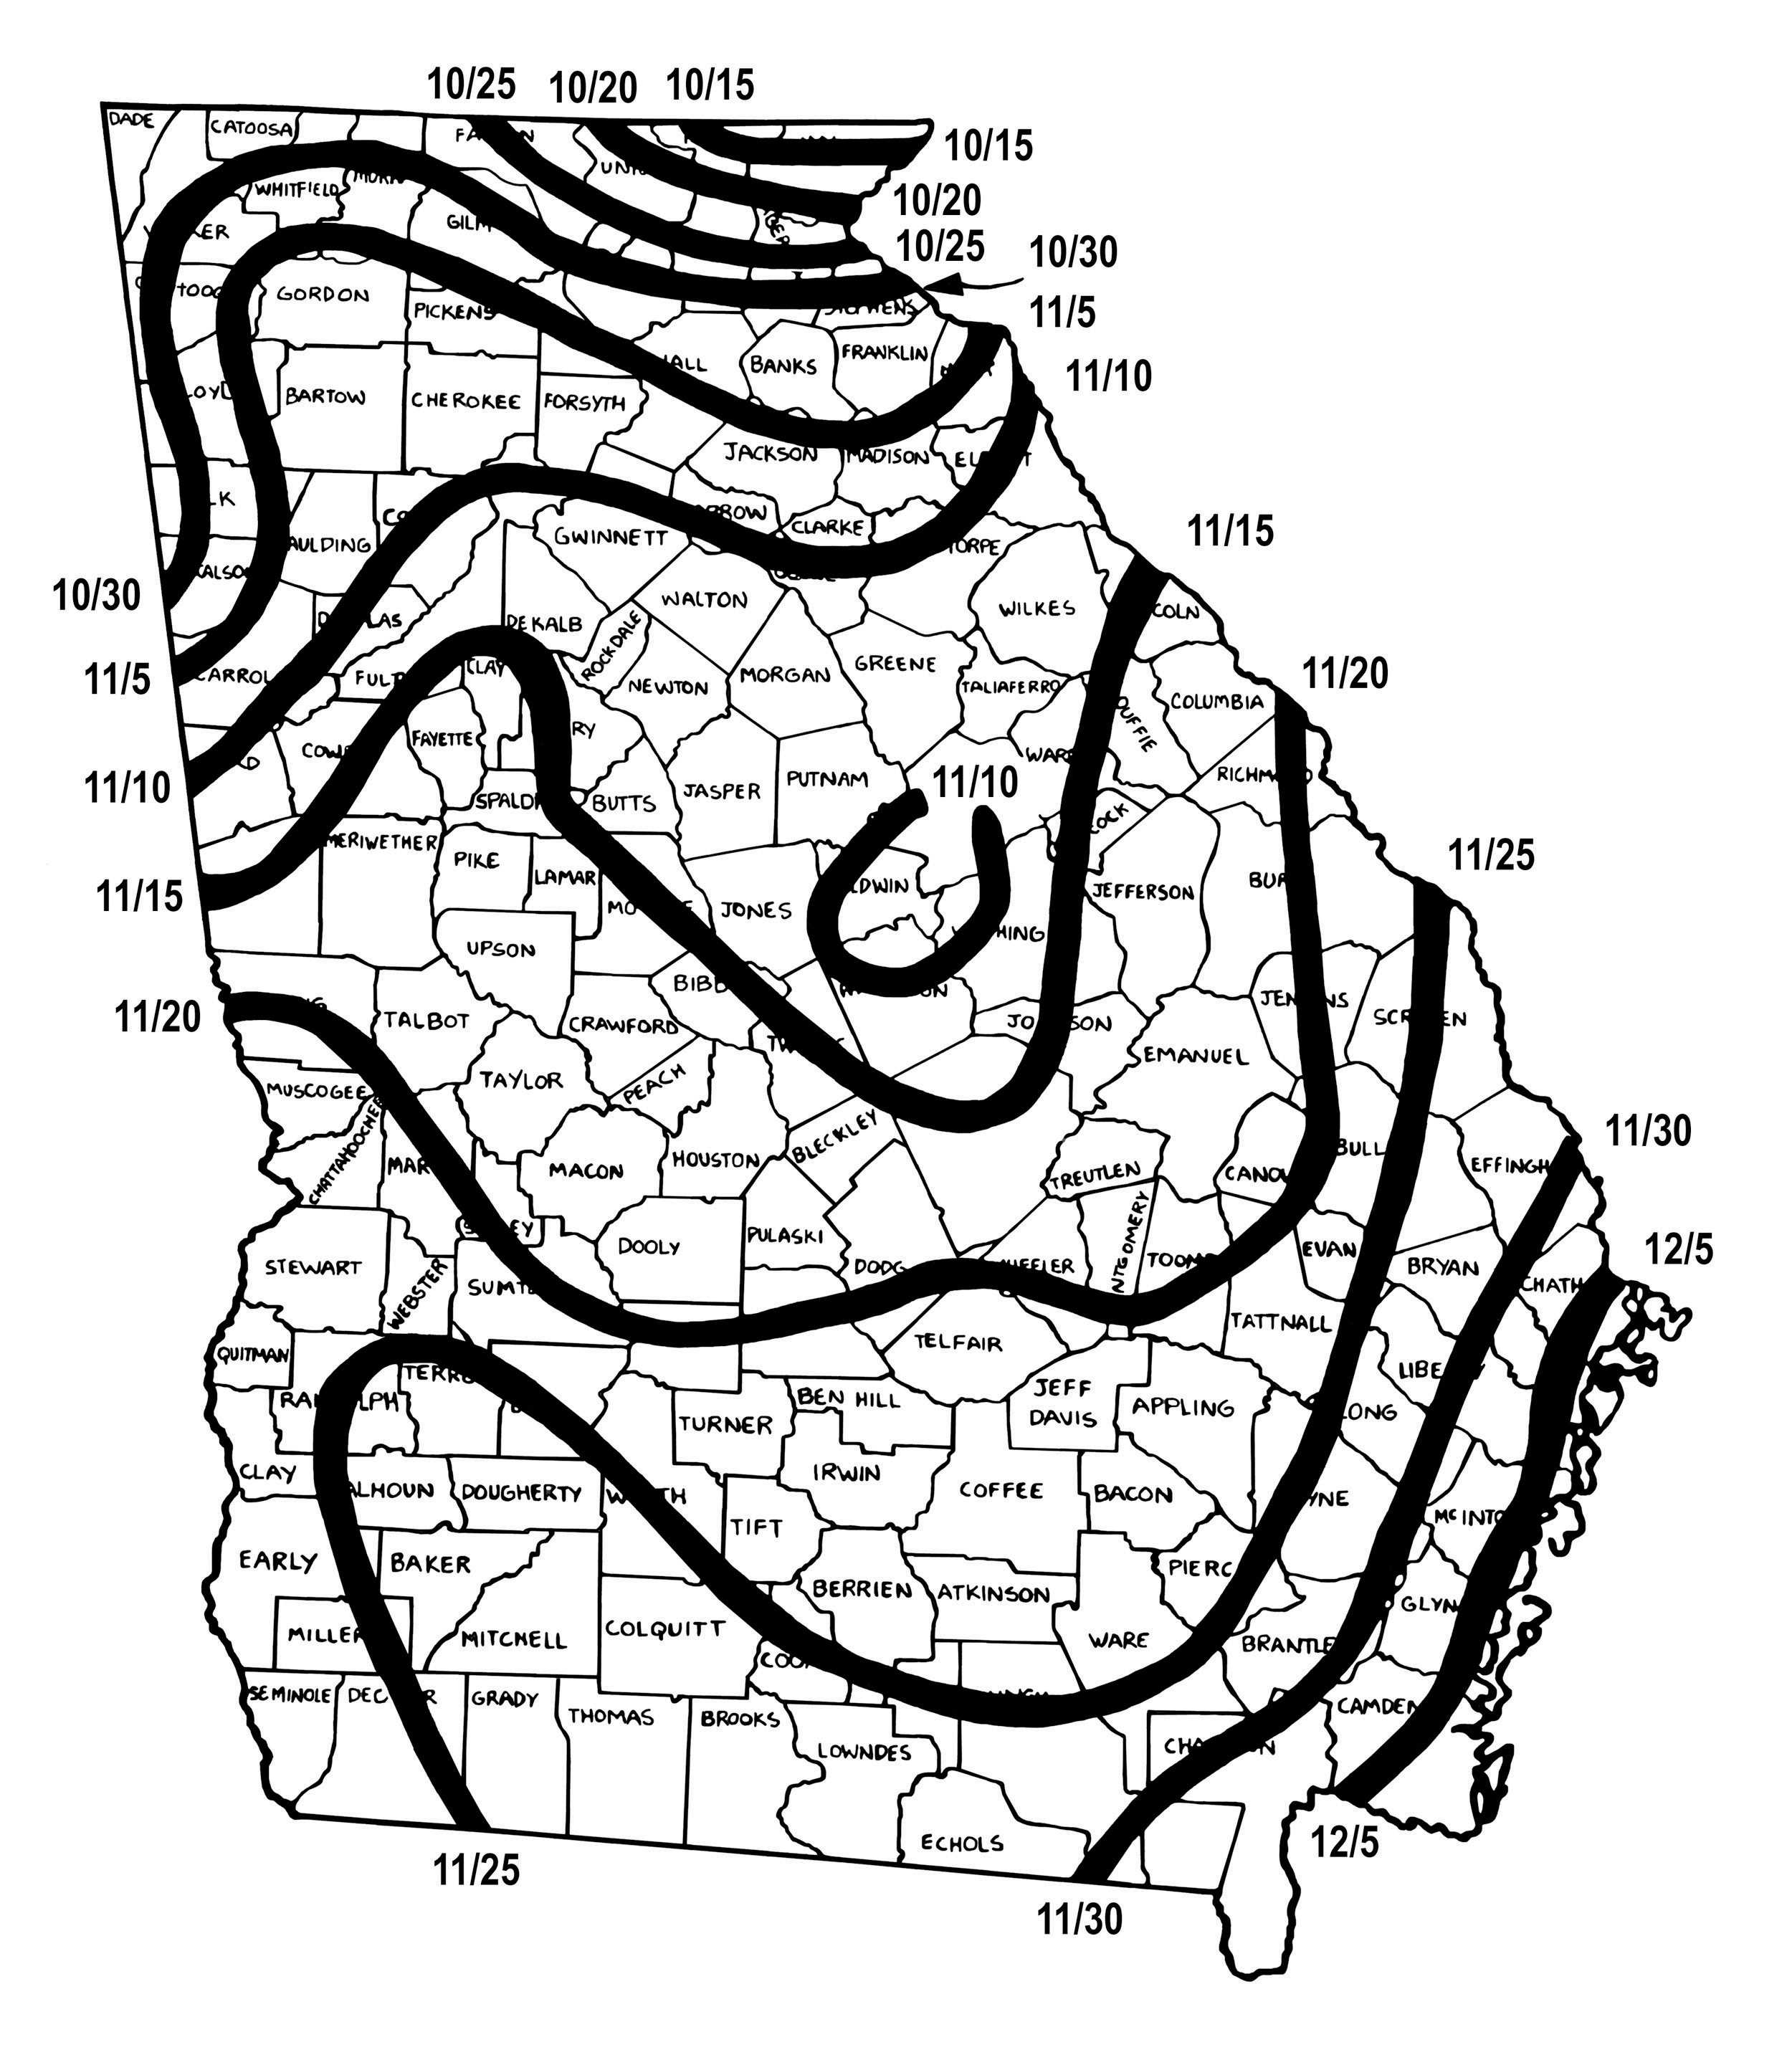 Map of Georgia showing the approximate first frost in fall. Dates range from 10/15 in the northeast corner of the state to 12/5 along the coast.